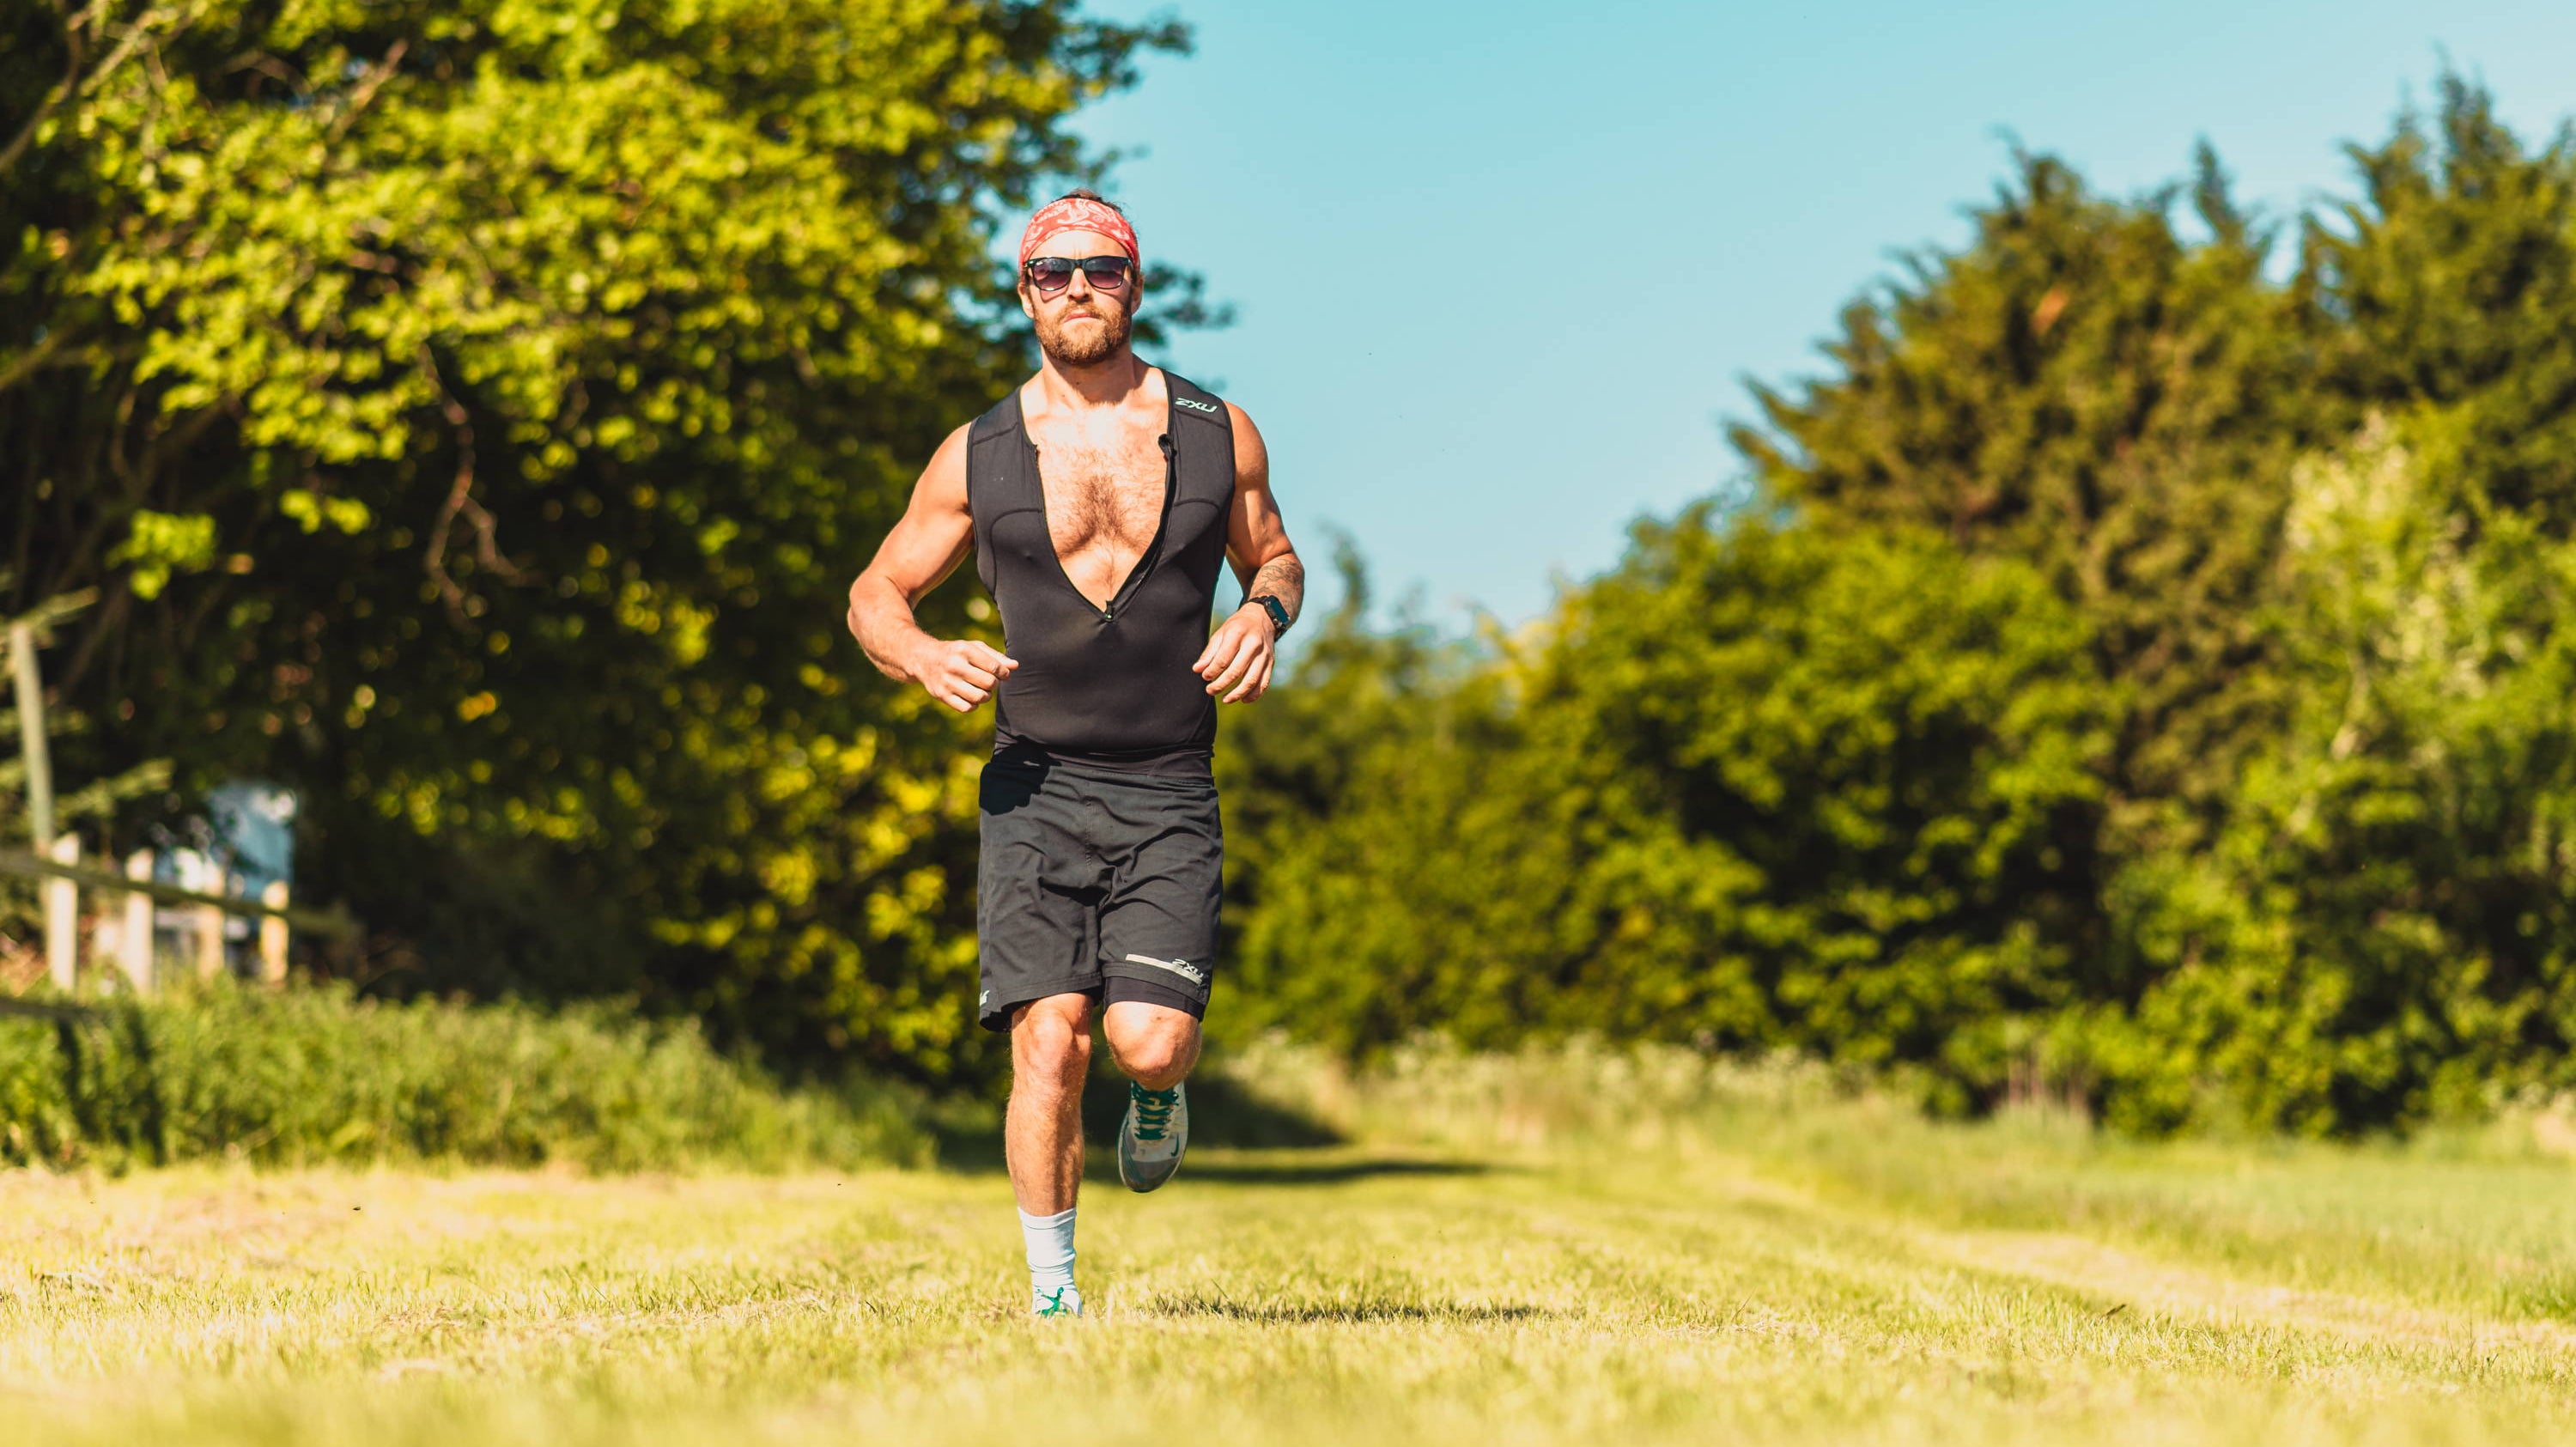 RUN STRONG - BULLETPROOF YOUR BODY FOR MORE MILEAGE